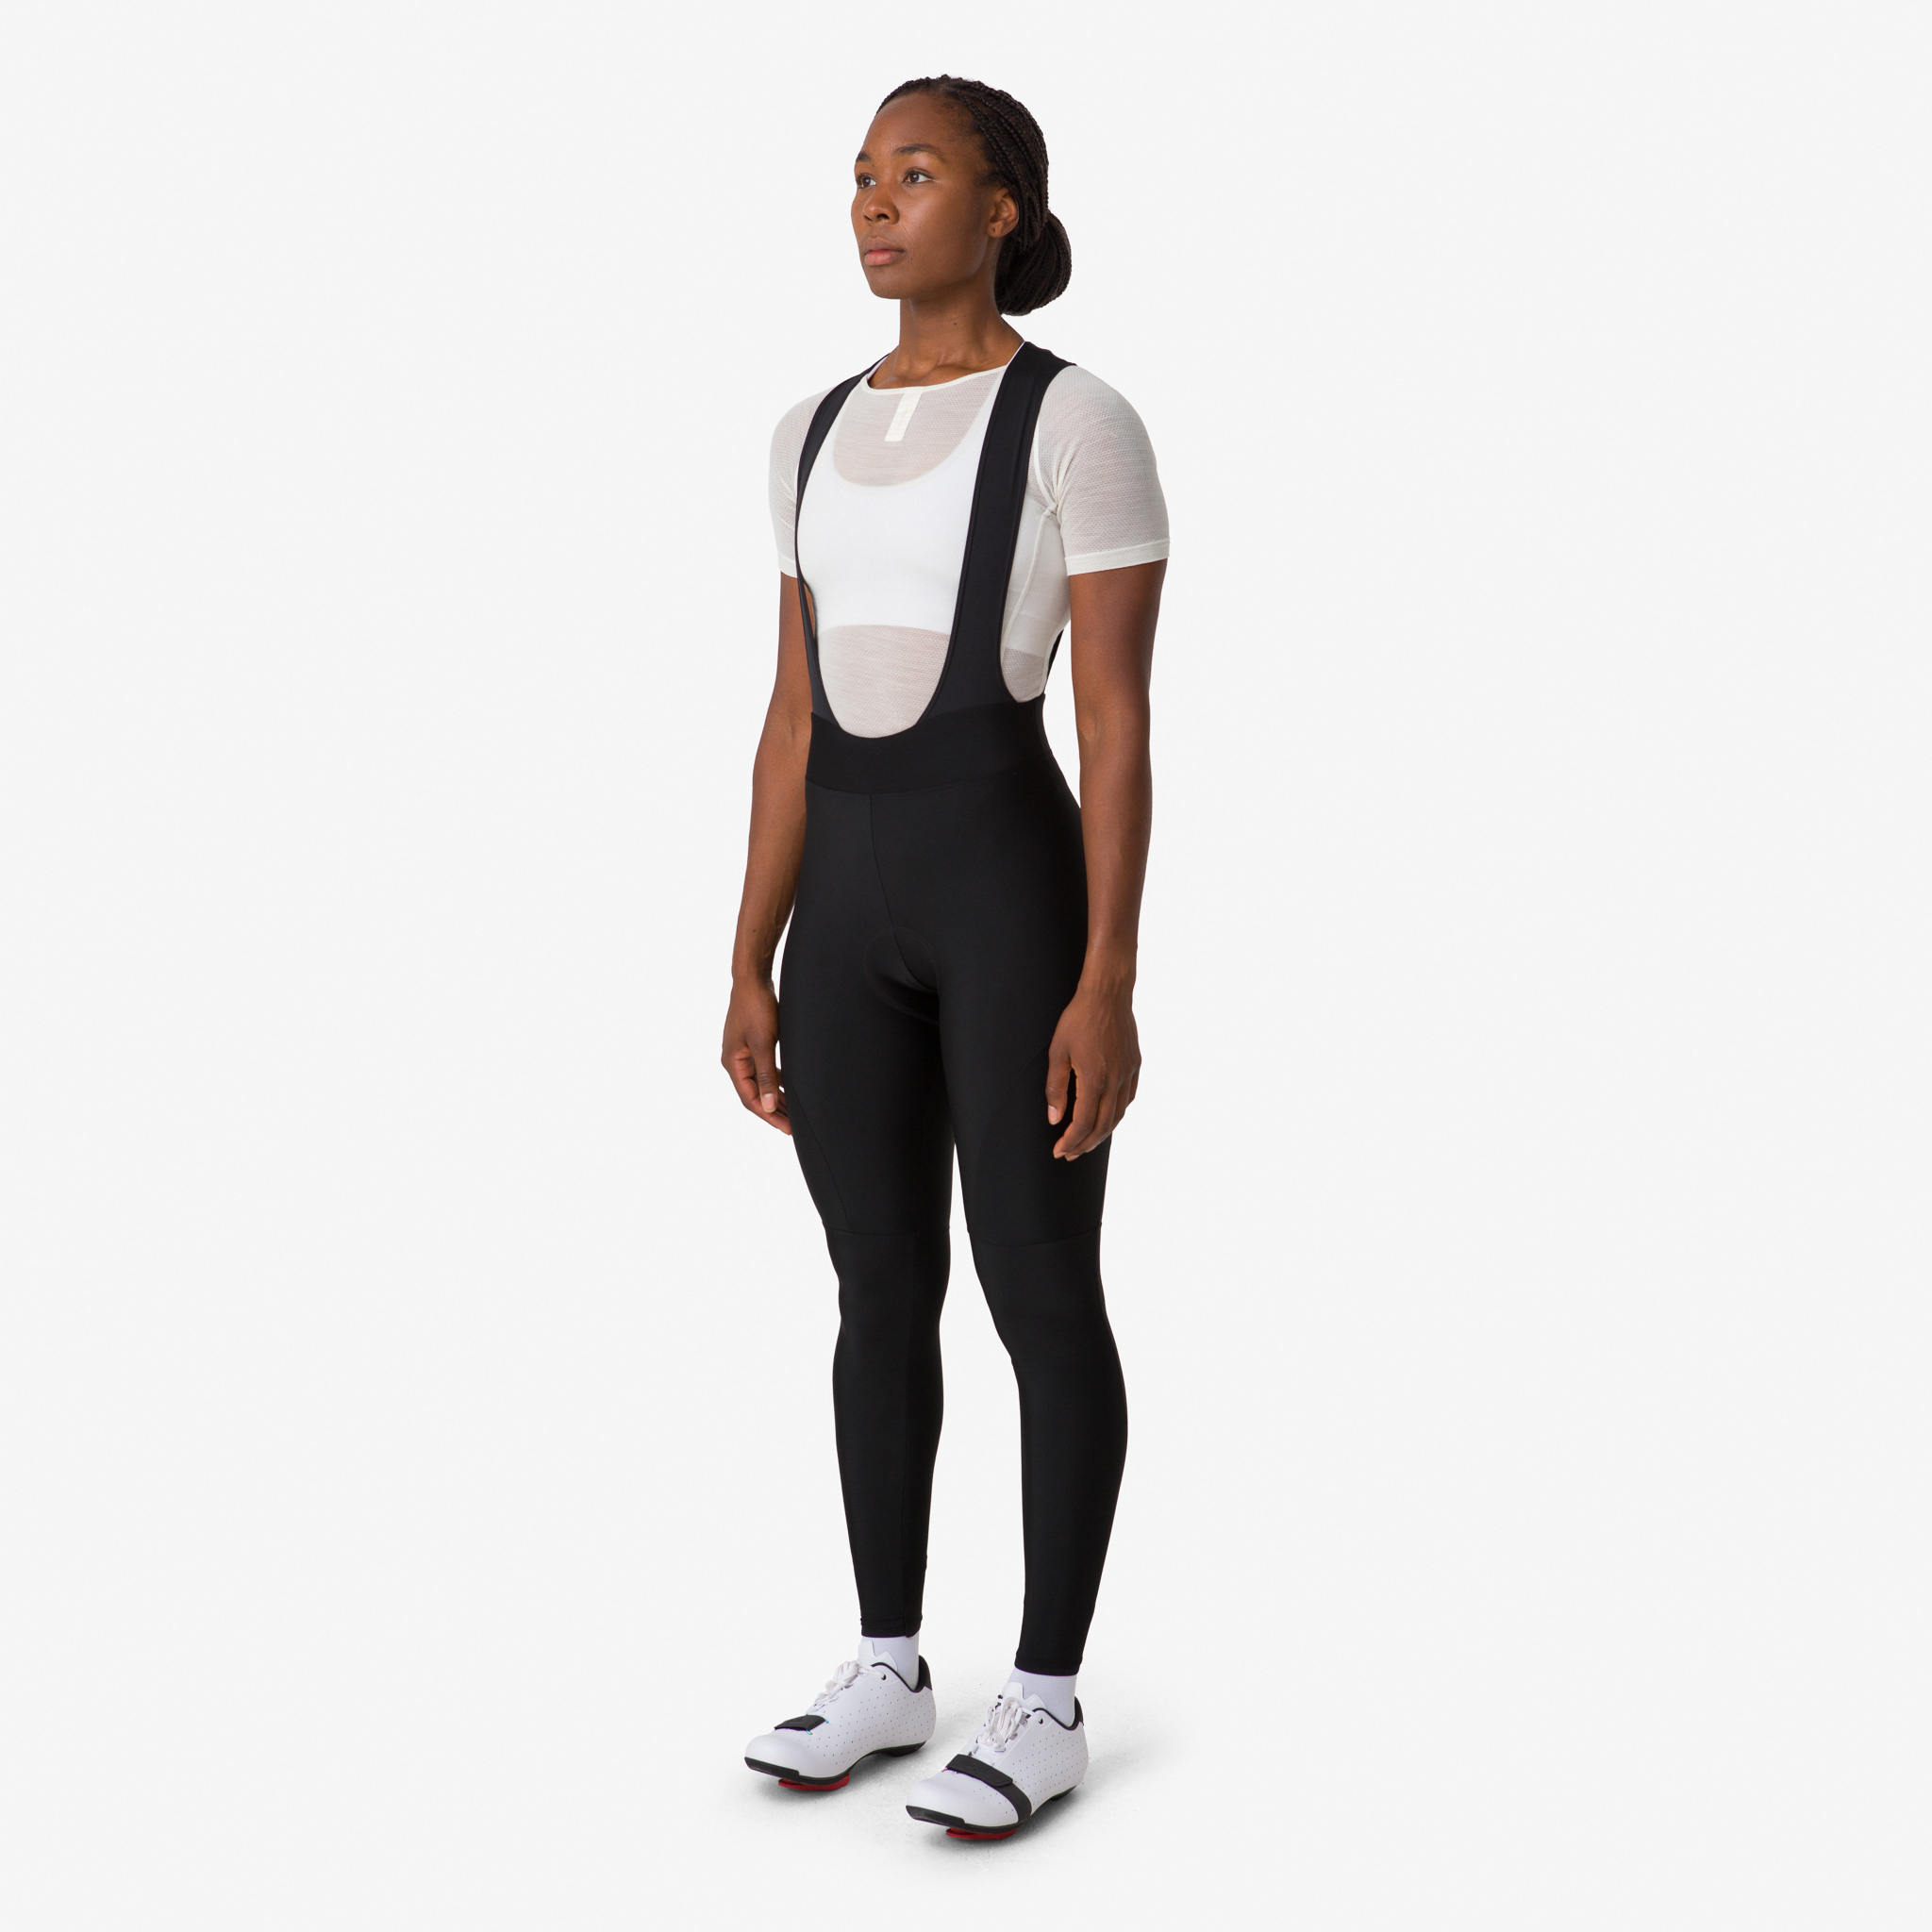 Stay Warm and Stylish with the Top Winter Cycling Bib Tights